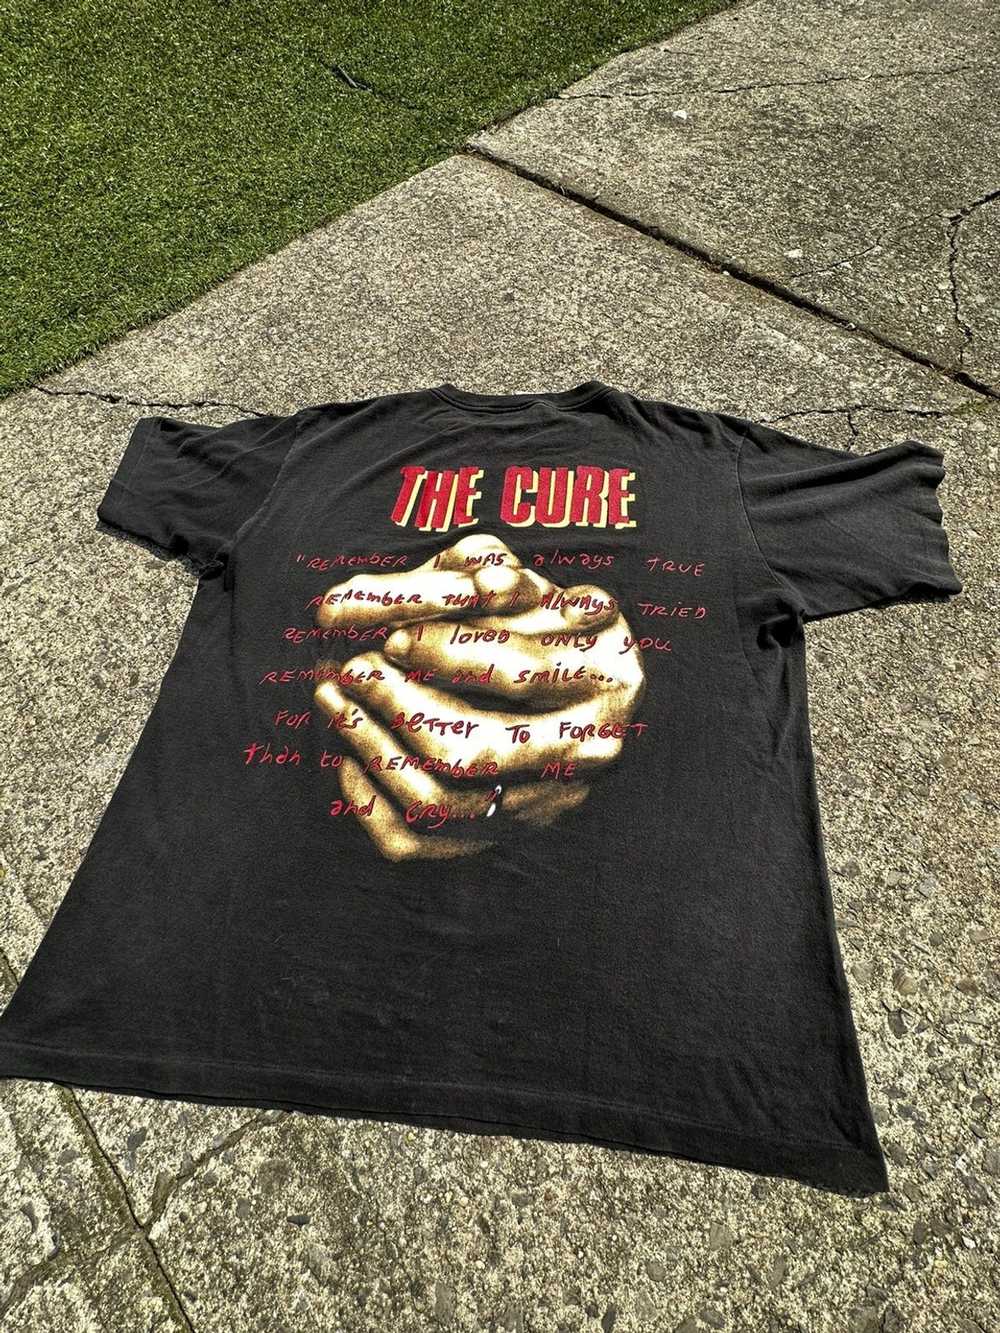 The Cure × Vintage 1996 The cure - image 2